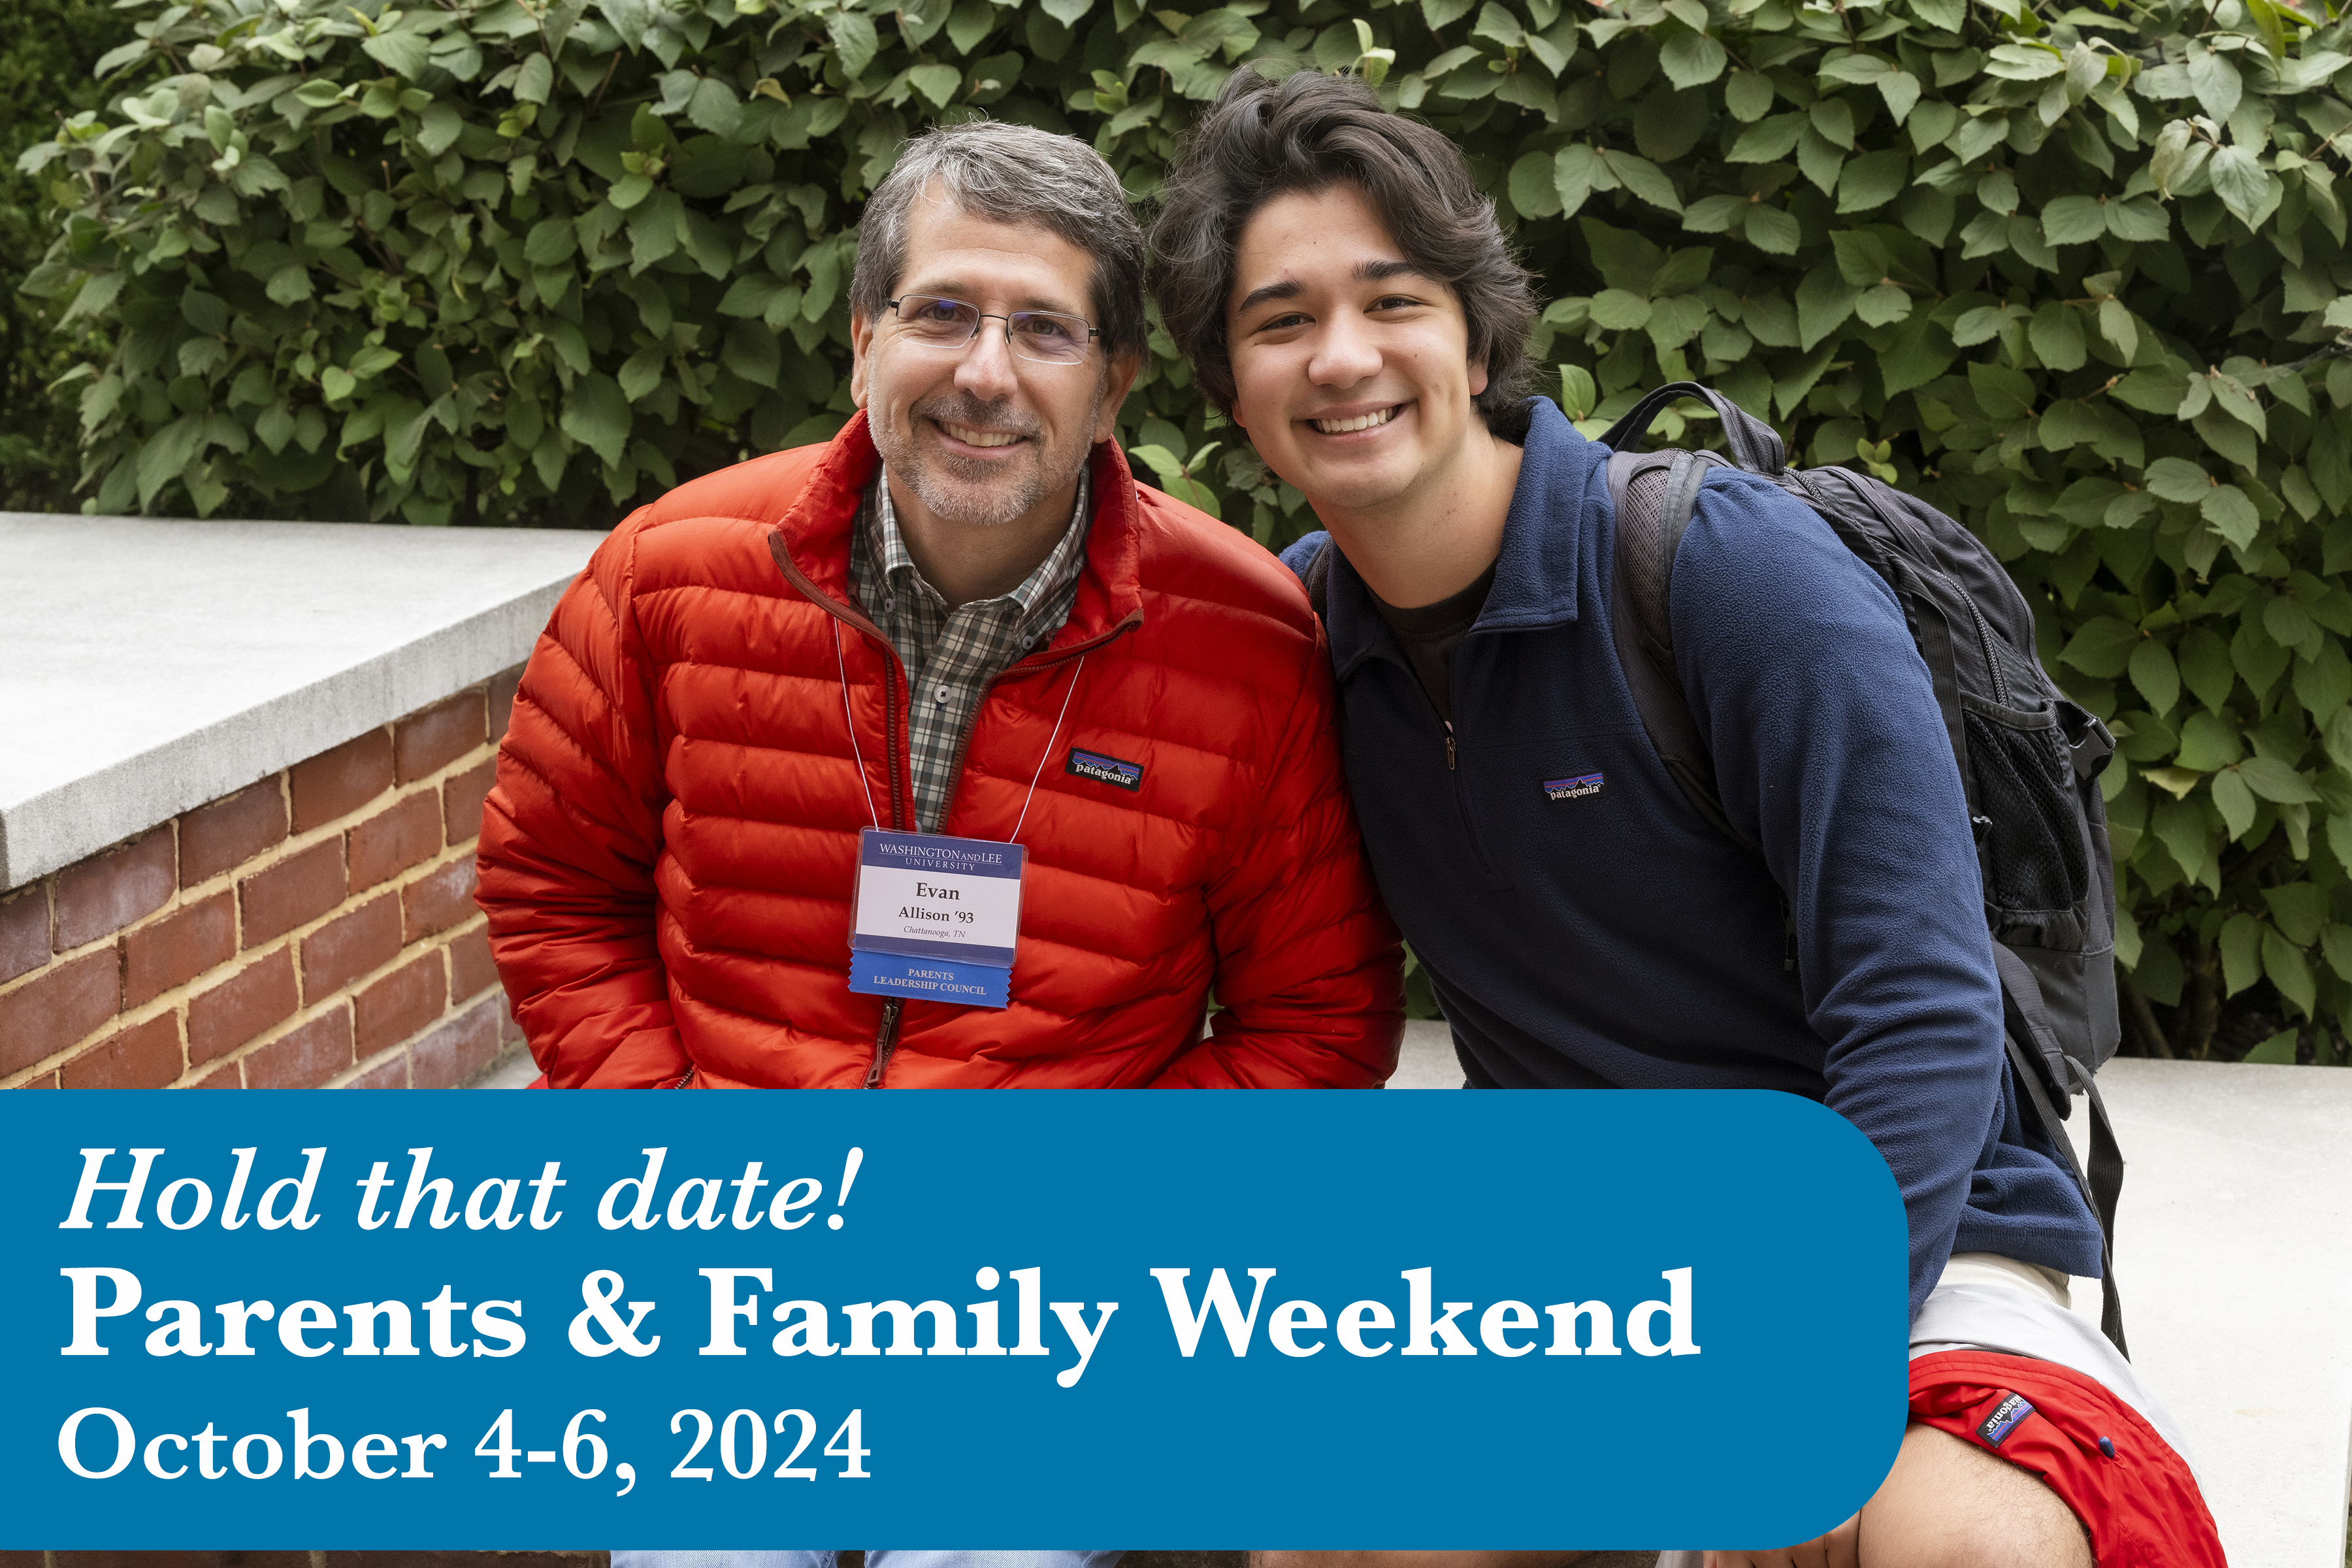 Hold that date! Parents & Family Weekend: October 4-6, 2024